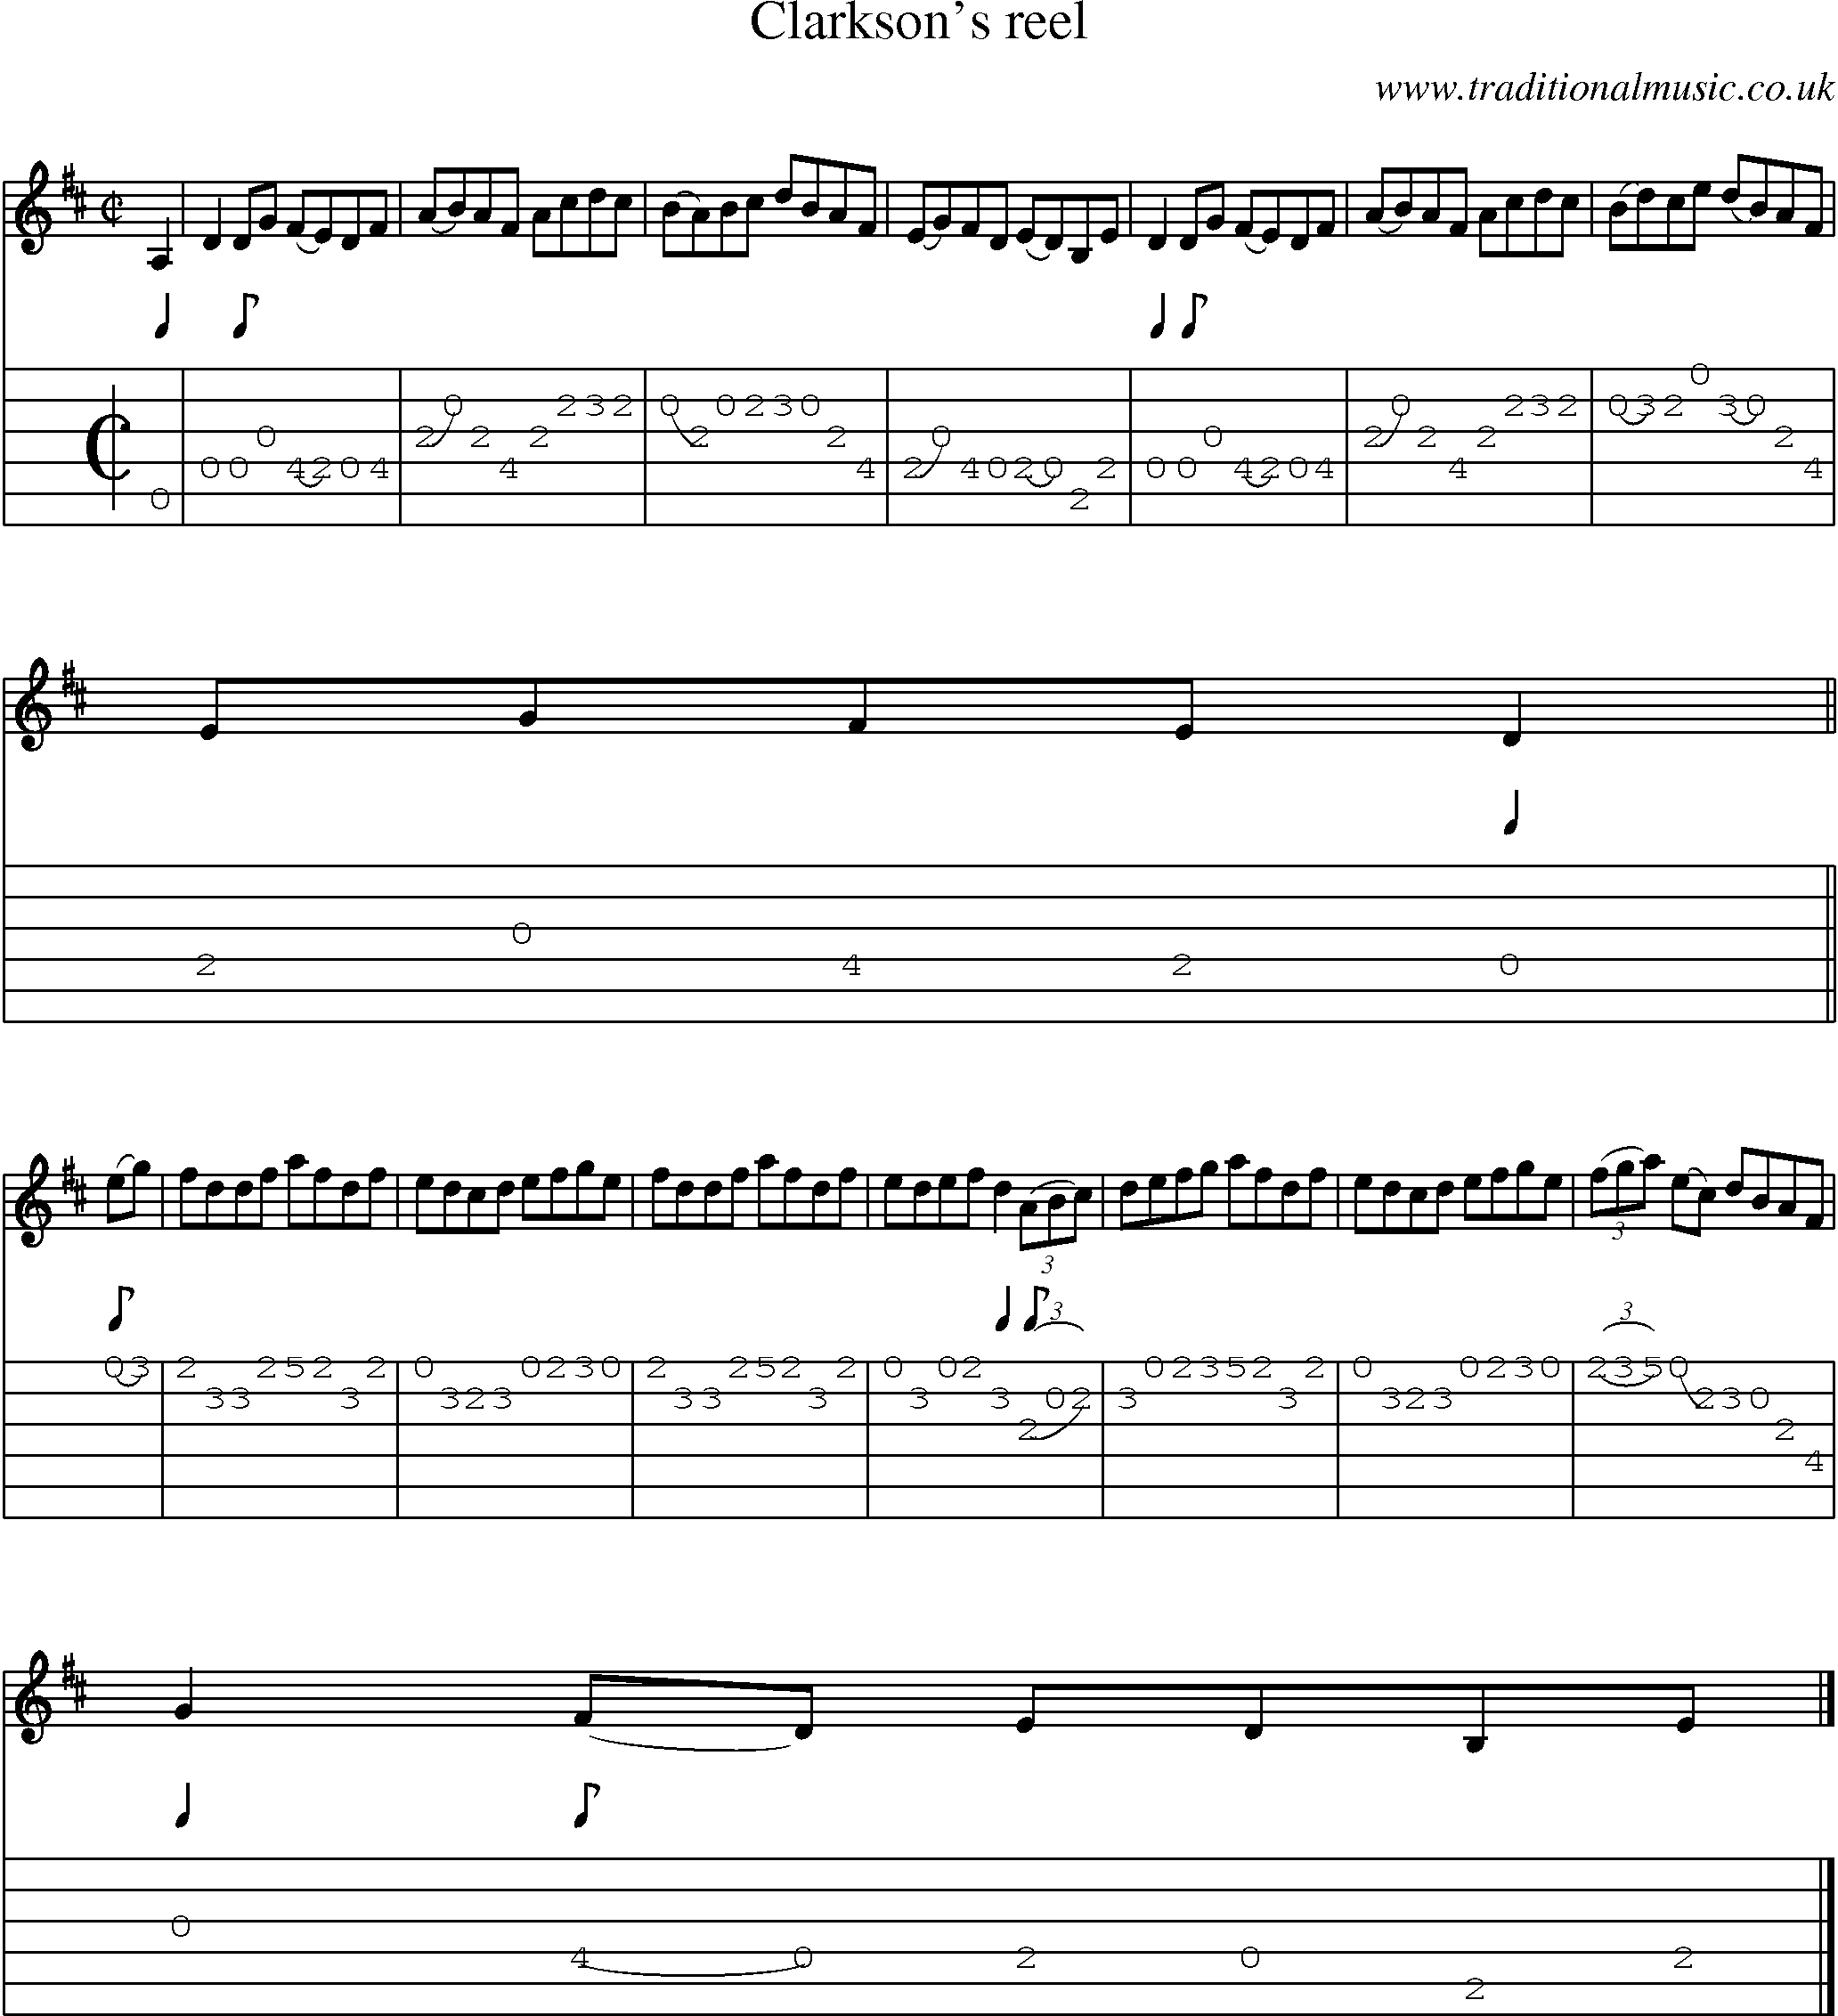 Music Score and Guitar Tabs for Clarksons Reel